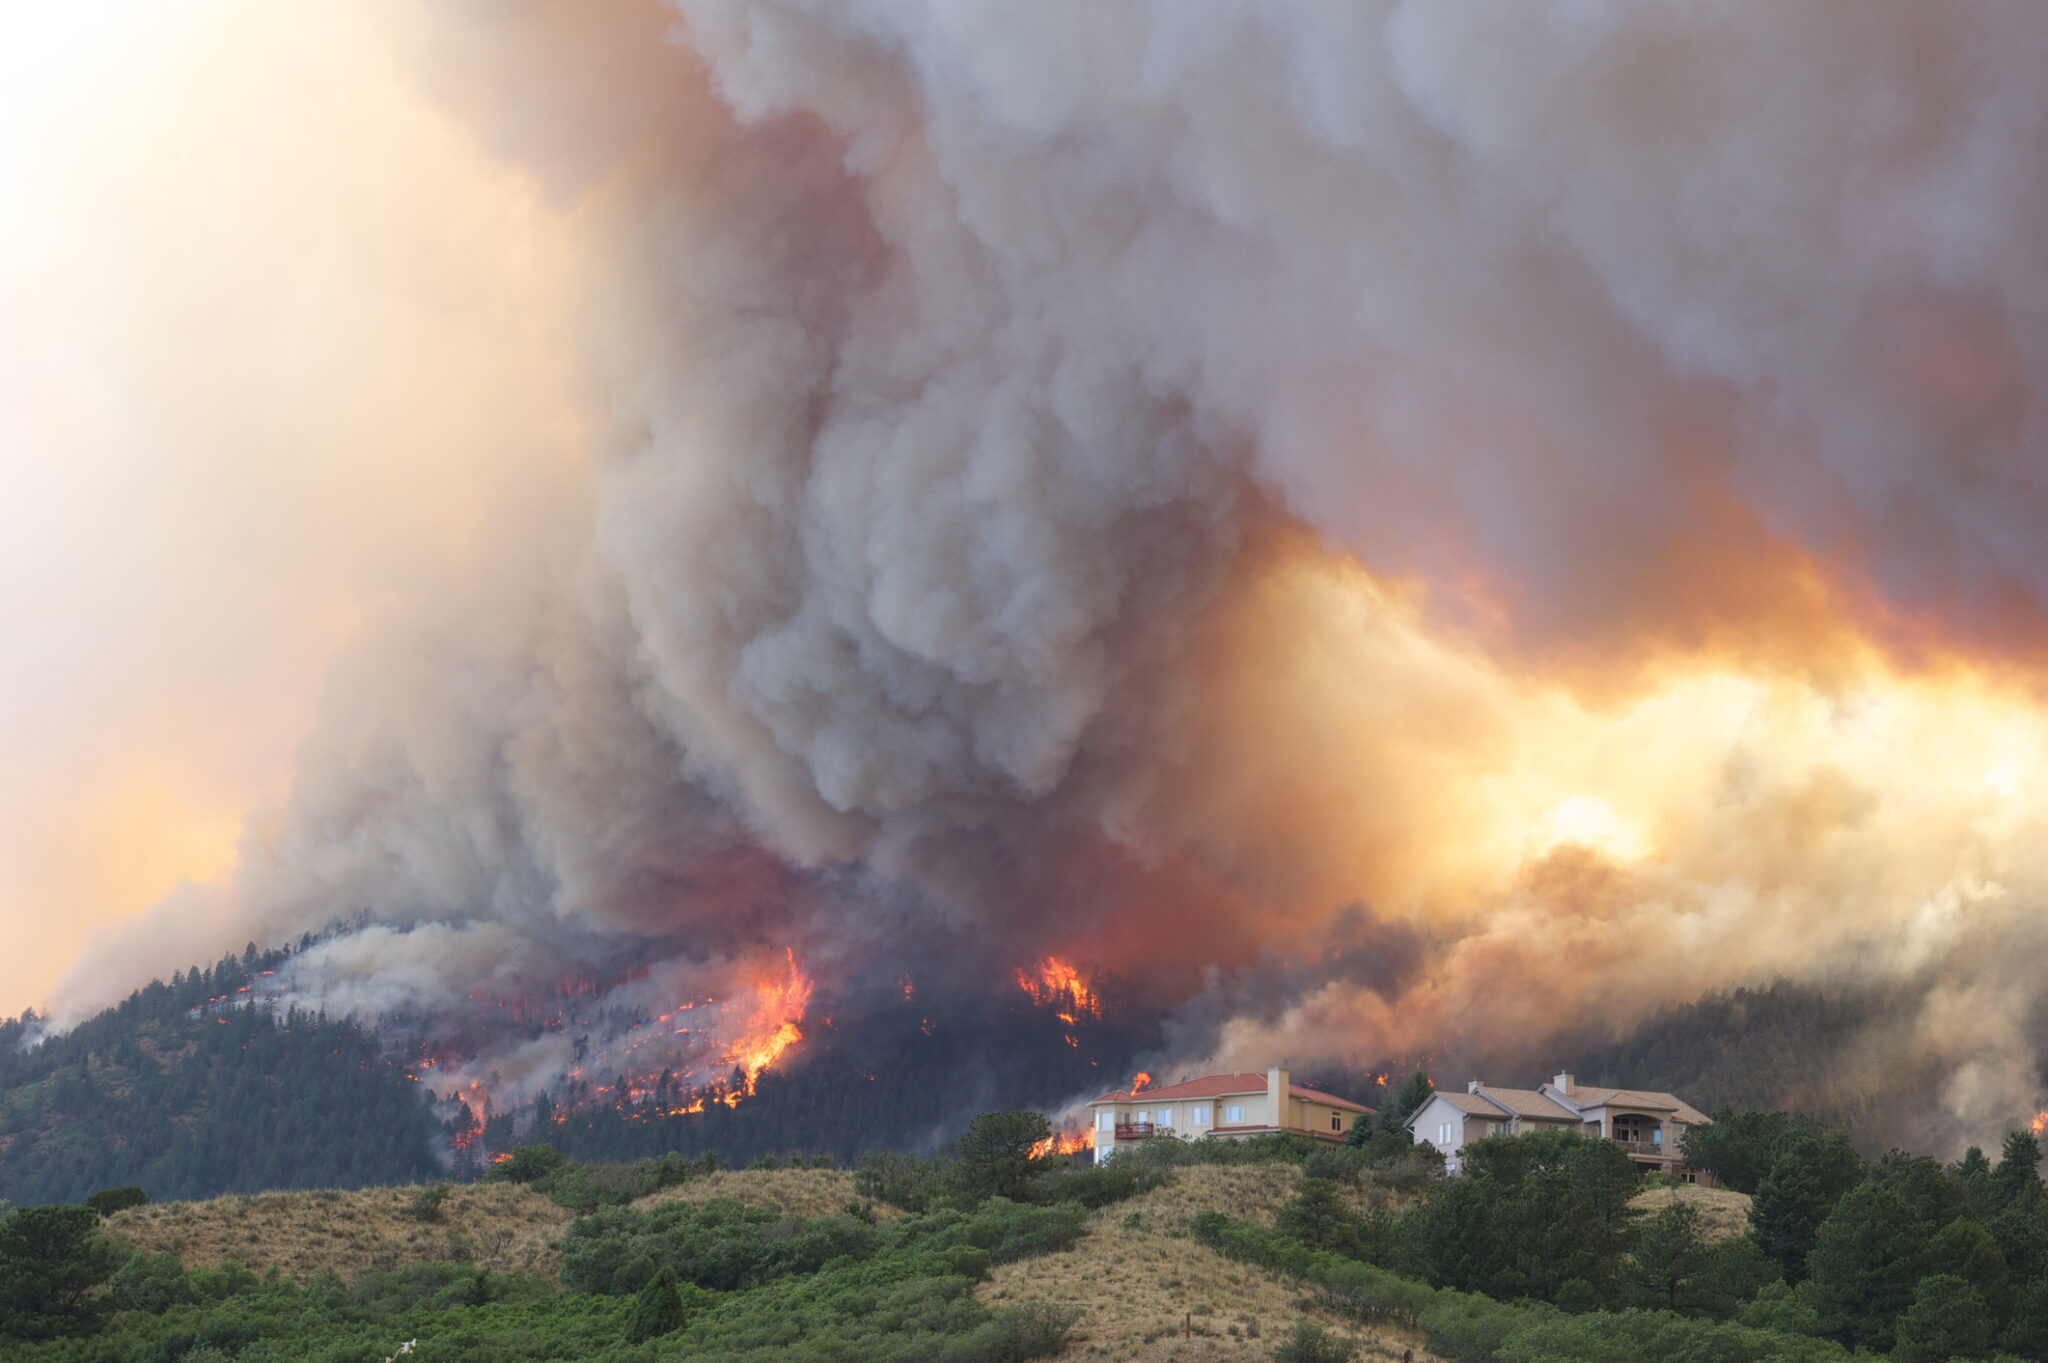 DESPITE HIGH-PROFILE EVENTS, U.S. WILDFIRE SEVERITY, FREQUENCY HAVE BEEN DECLINING